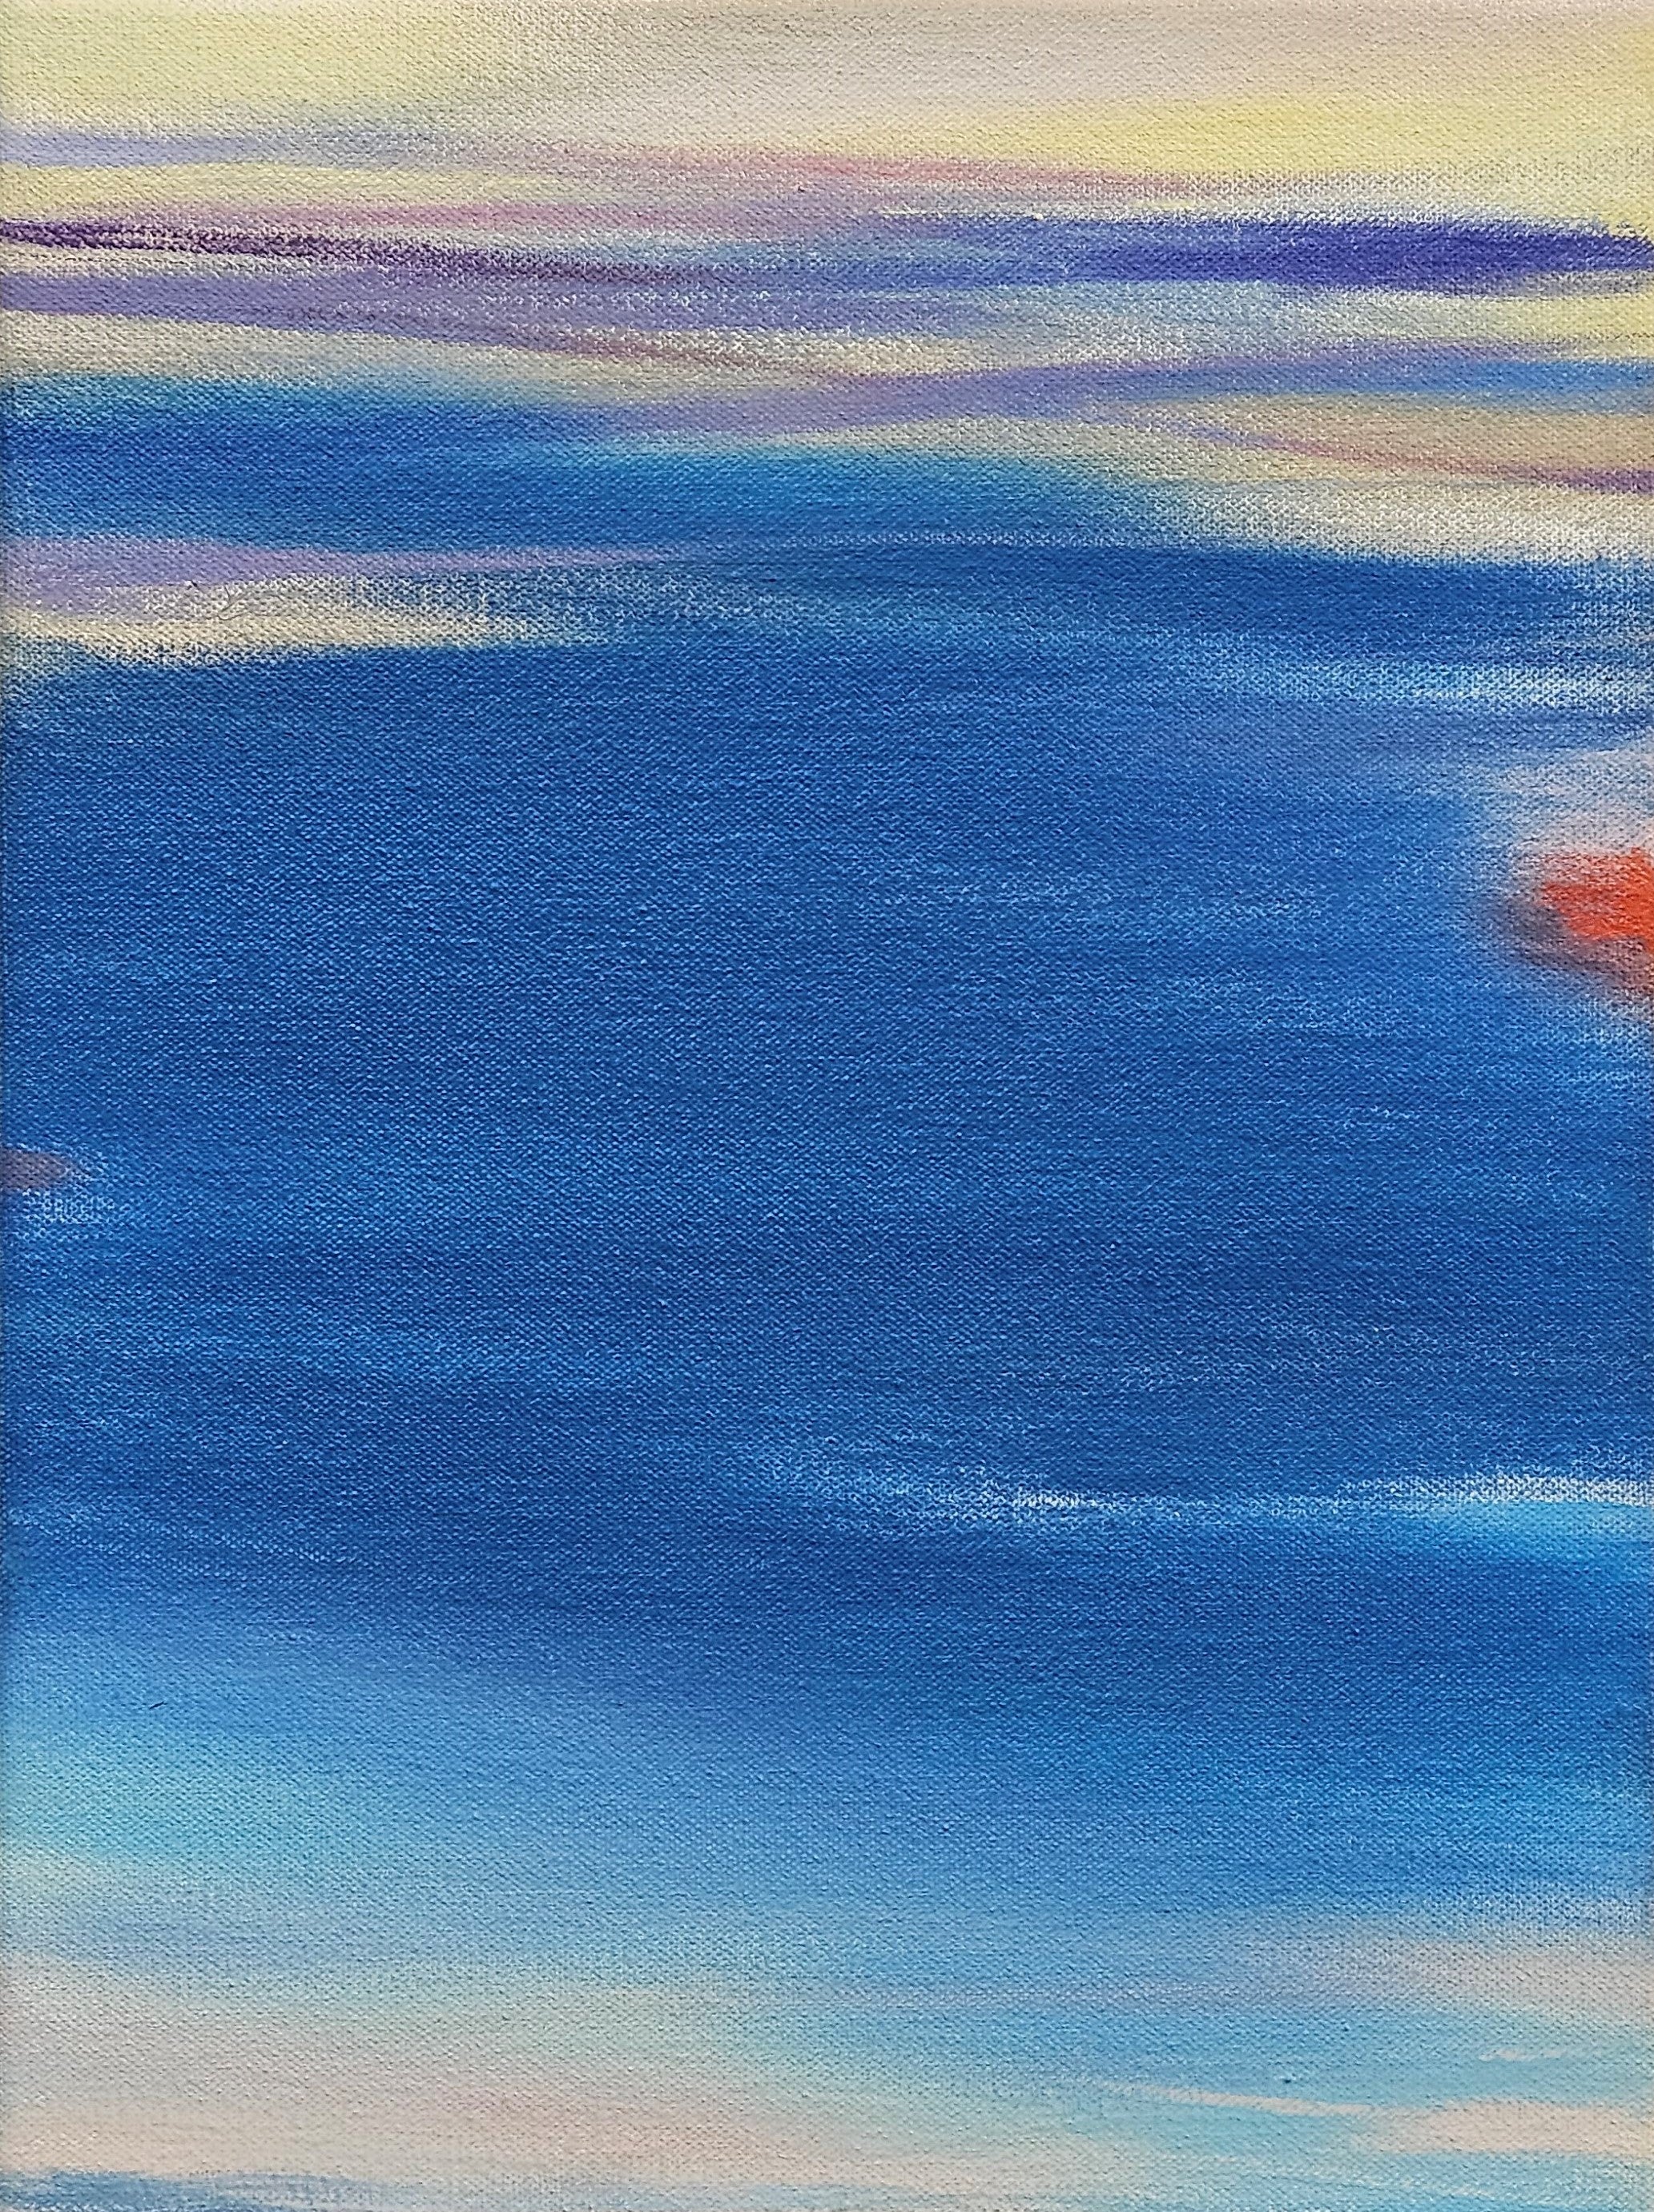 'WAVES' - oil on canvas